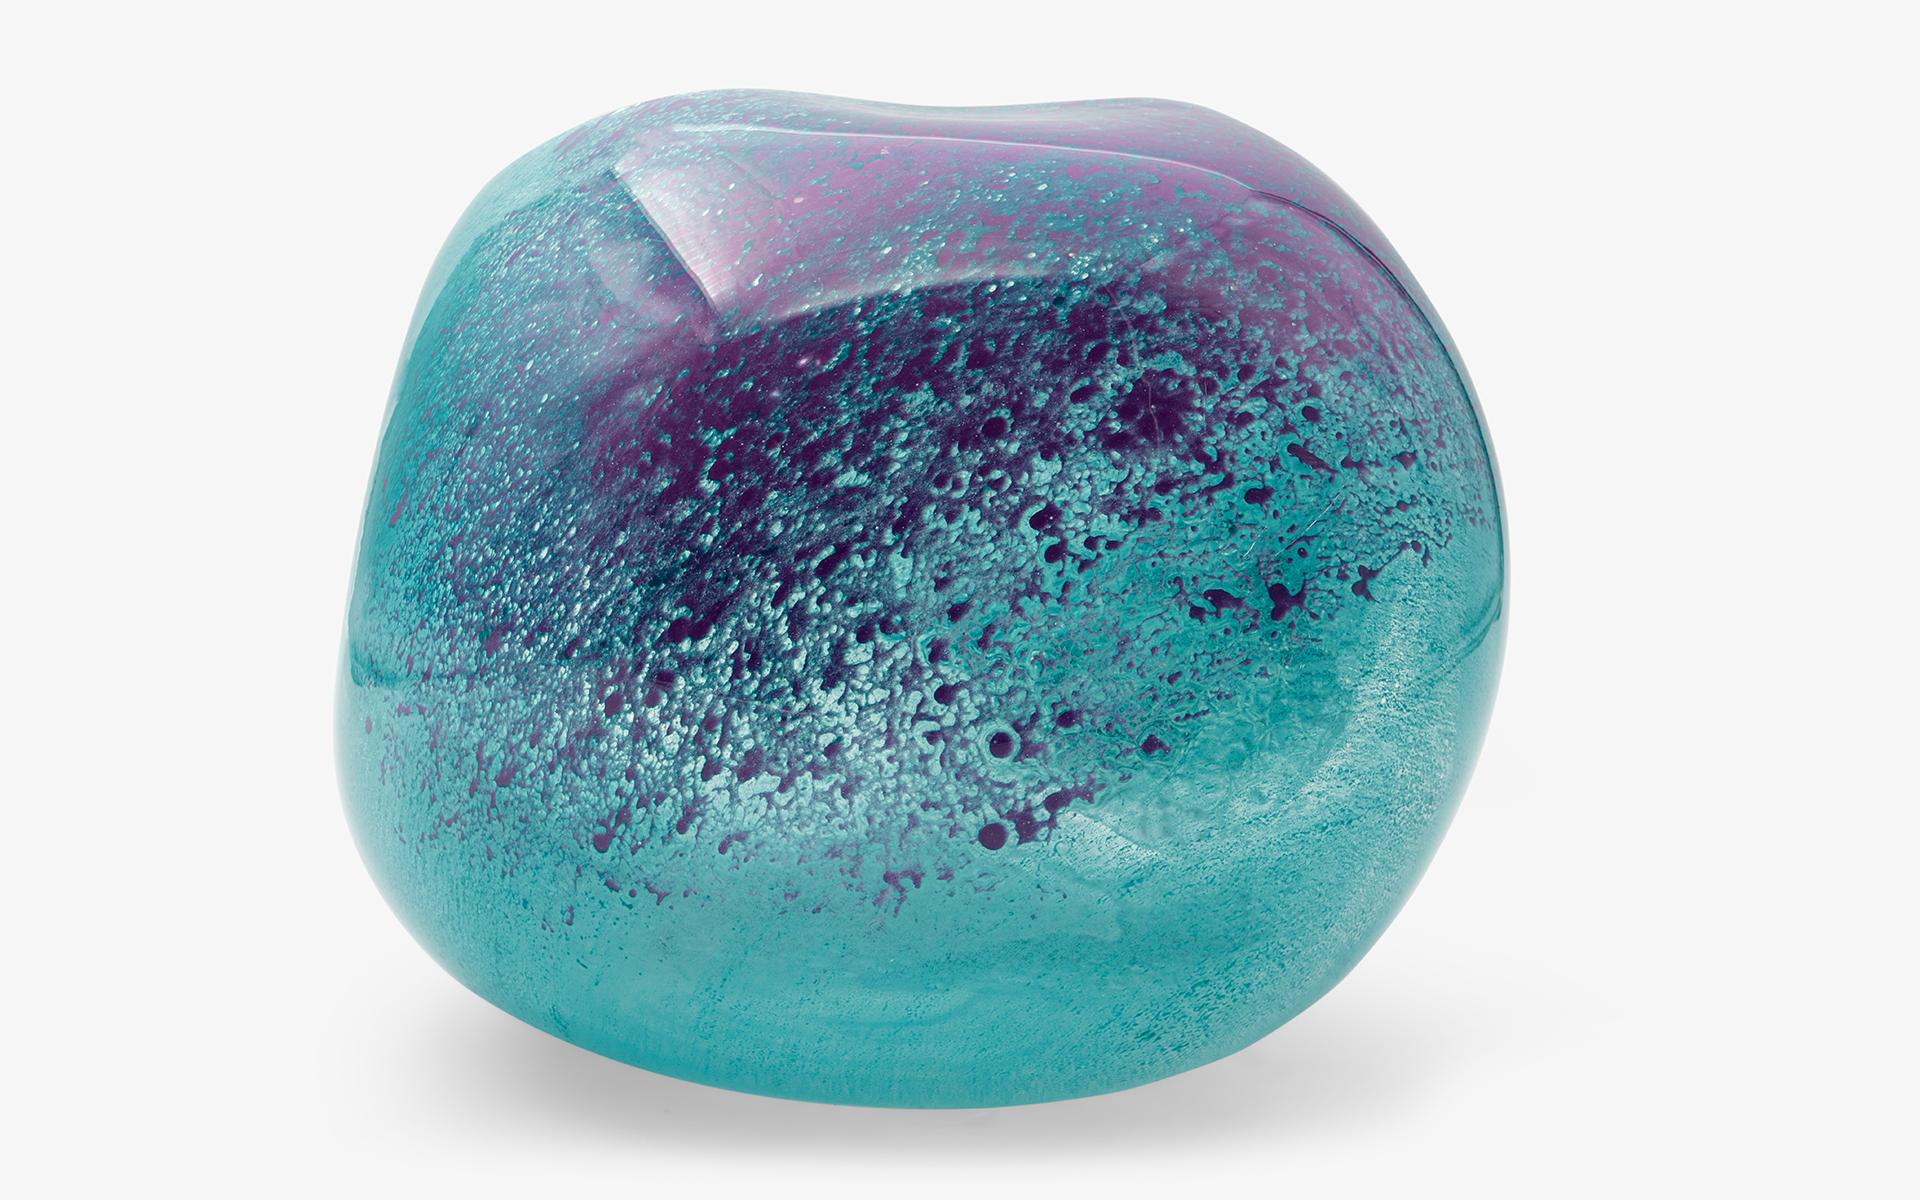 Turkish Turquoise and Lilac Color Amorphous Blown Glass Vase No:2